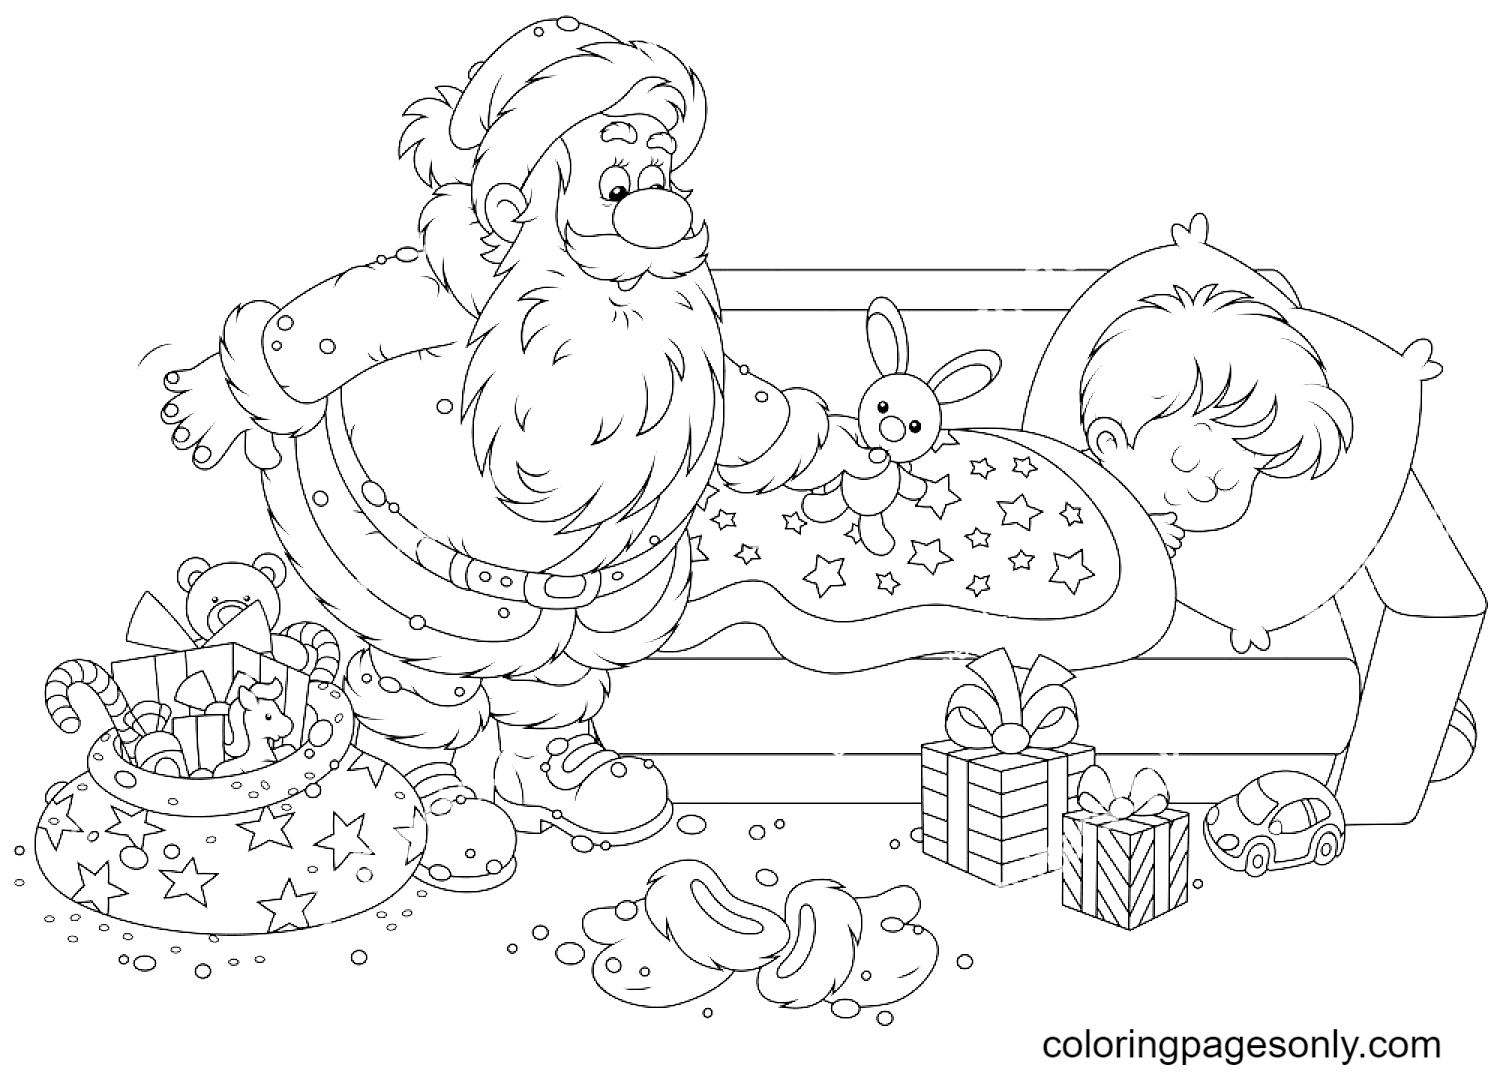 Santa Claus Putting Presents by the Bed of a Sleeping Boy Coloring Page